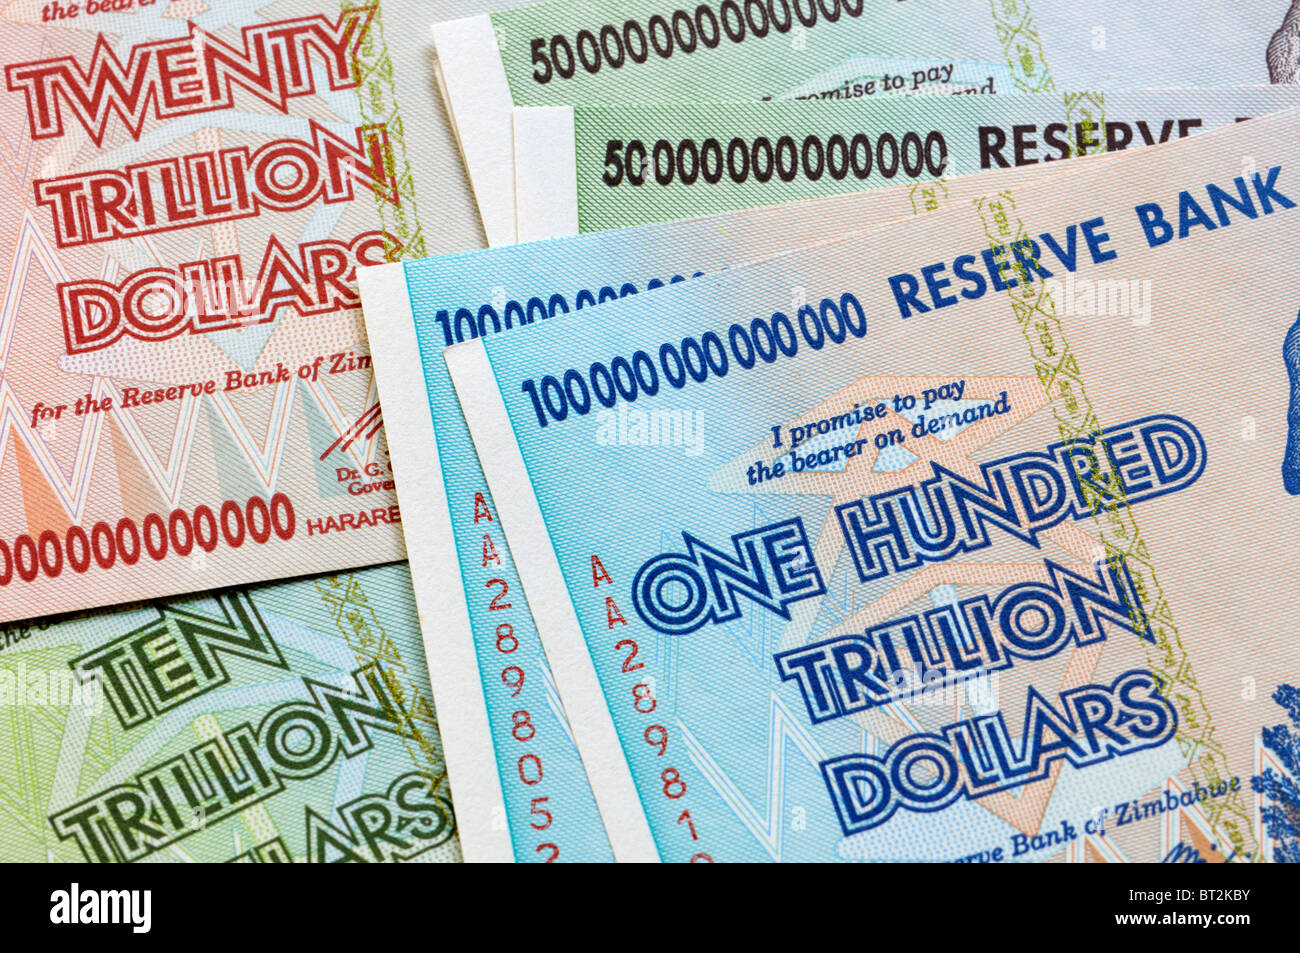 Zimbabwean hyperinflationary banknotes of 10 to 100 Trillion Dollars from 2008 Stock Photo